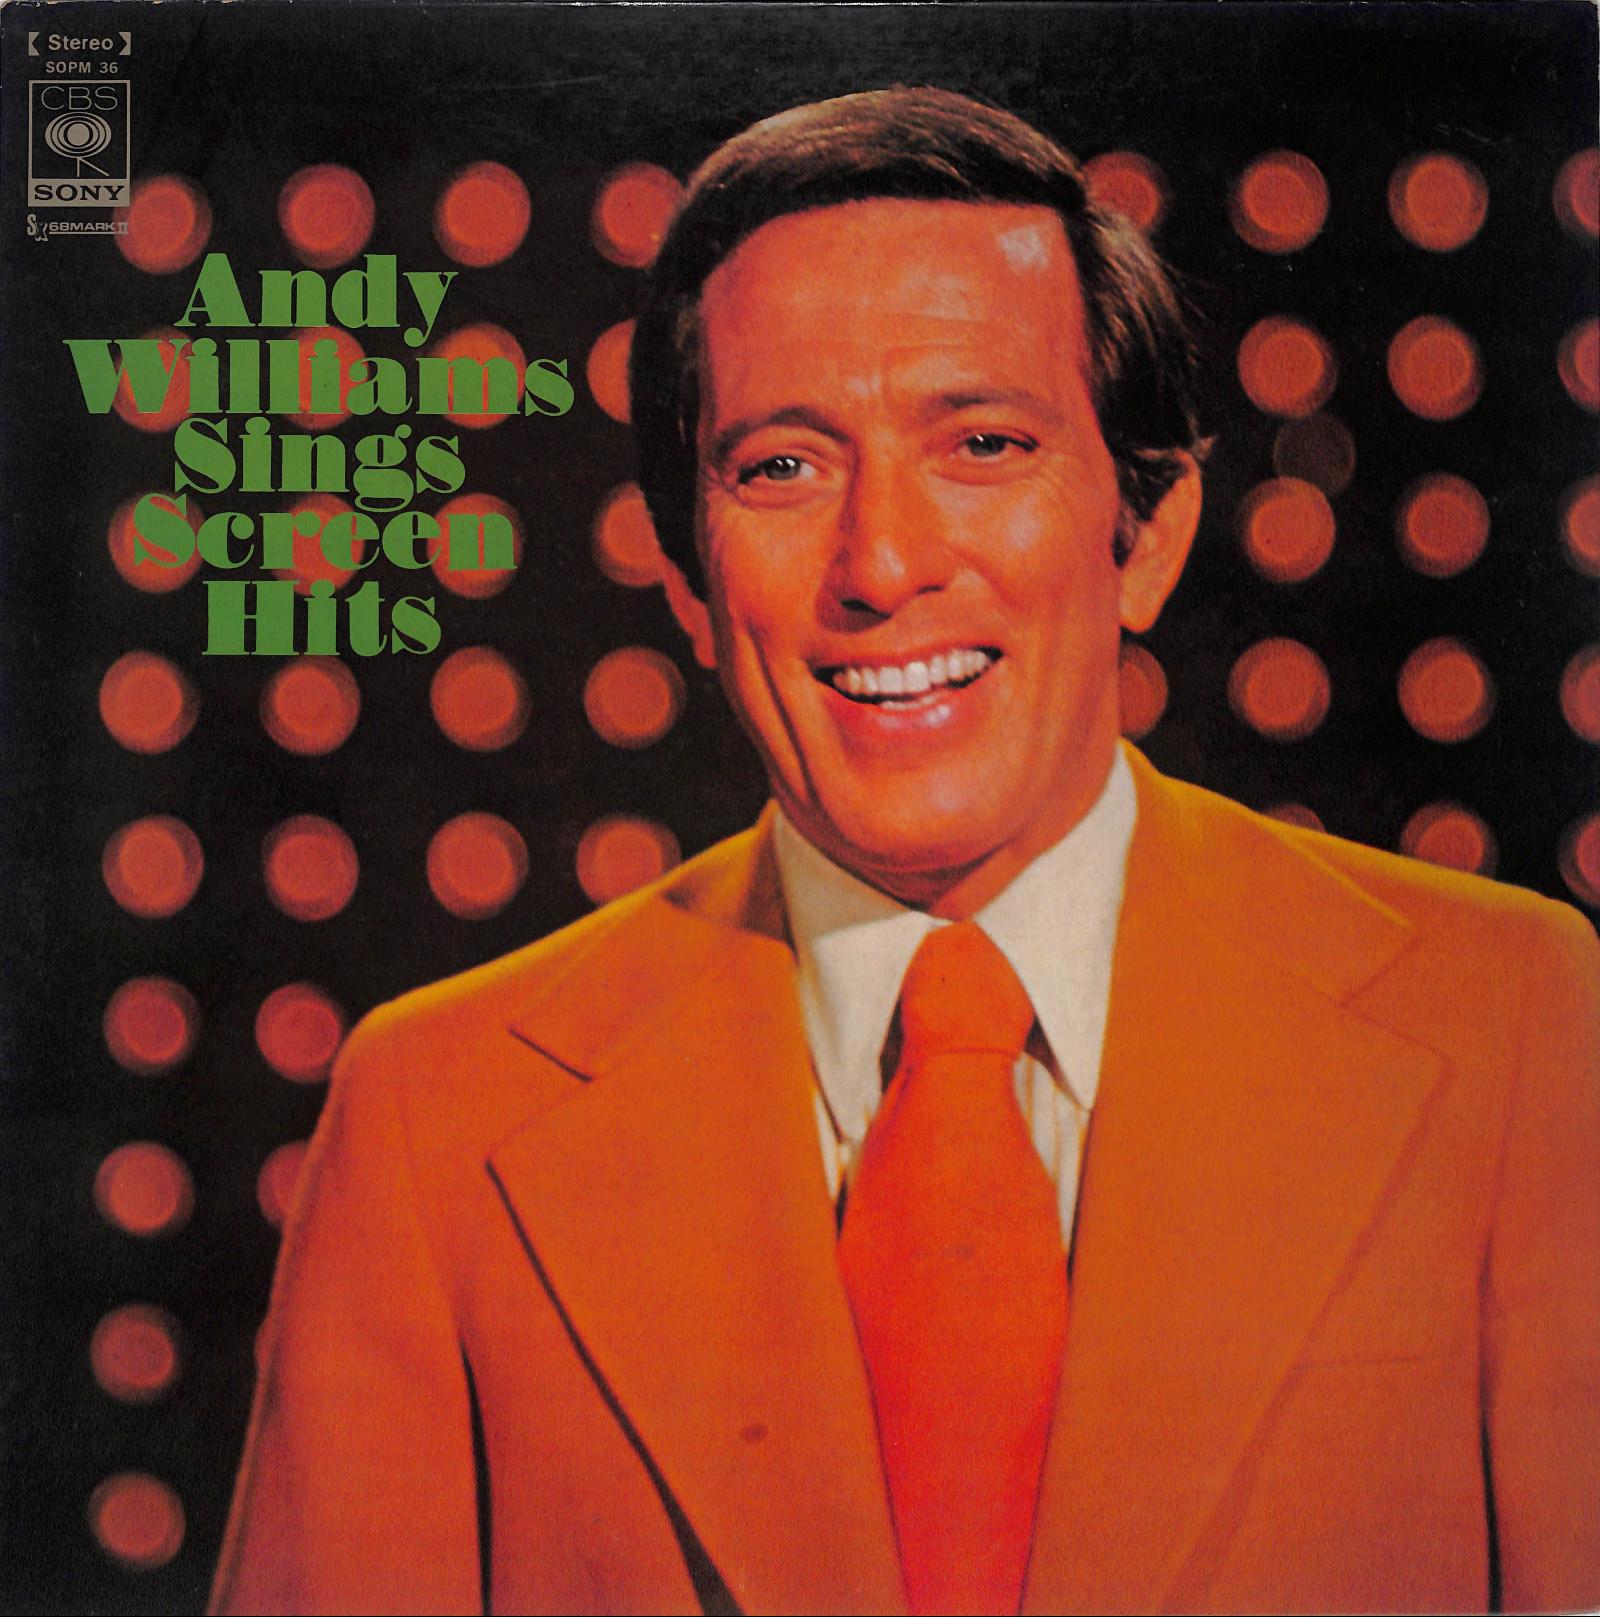 ANDY WILLIAMS - Andy Williams Sings Screen Hits